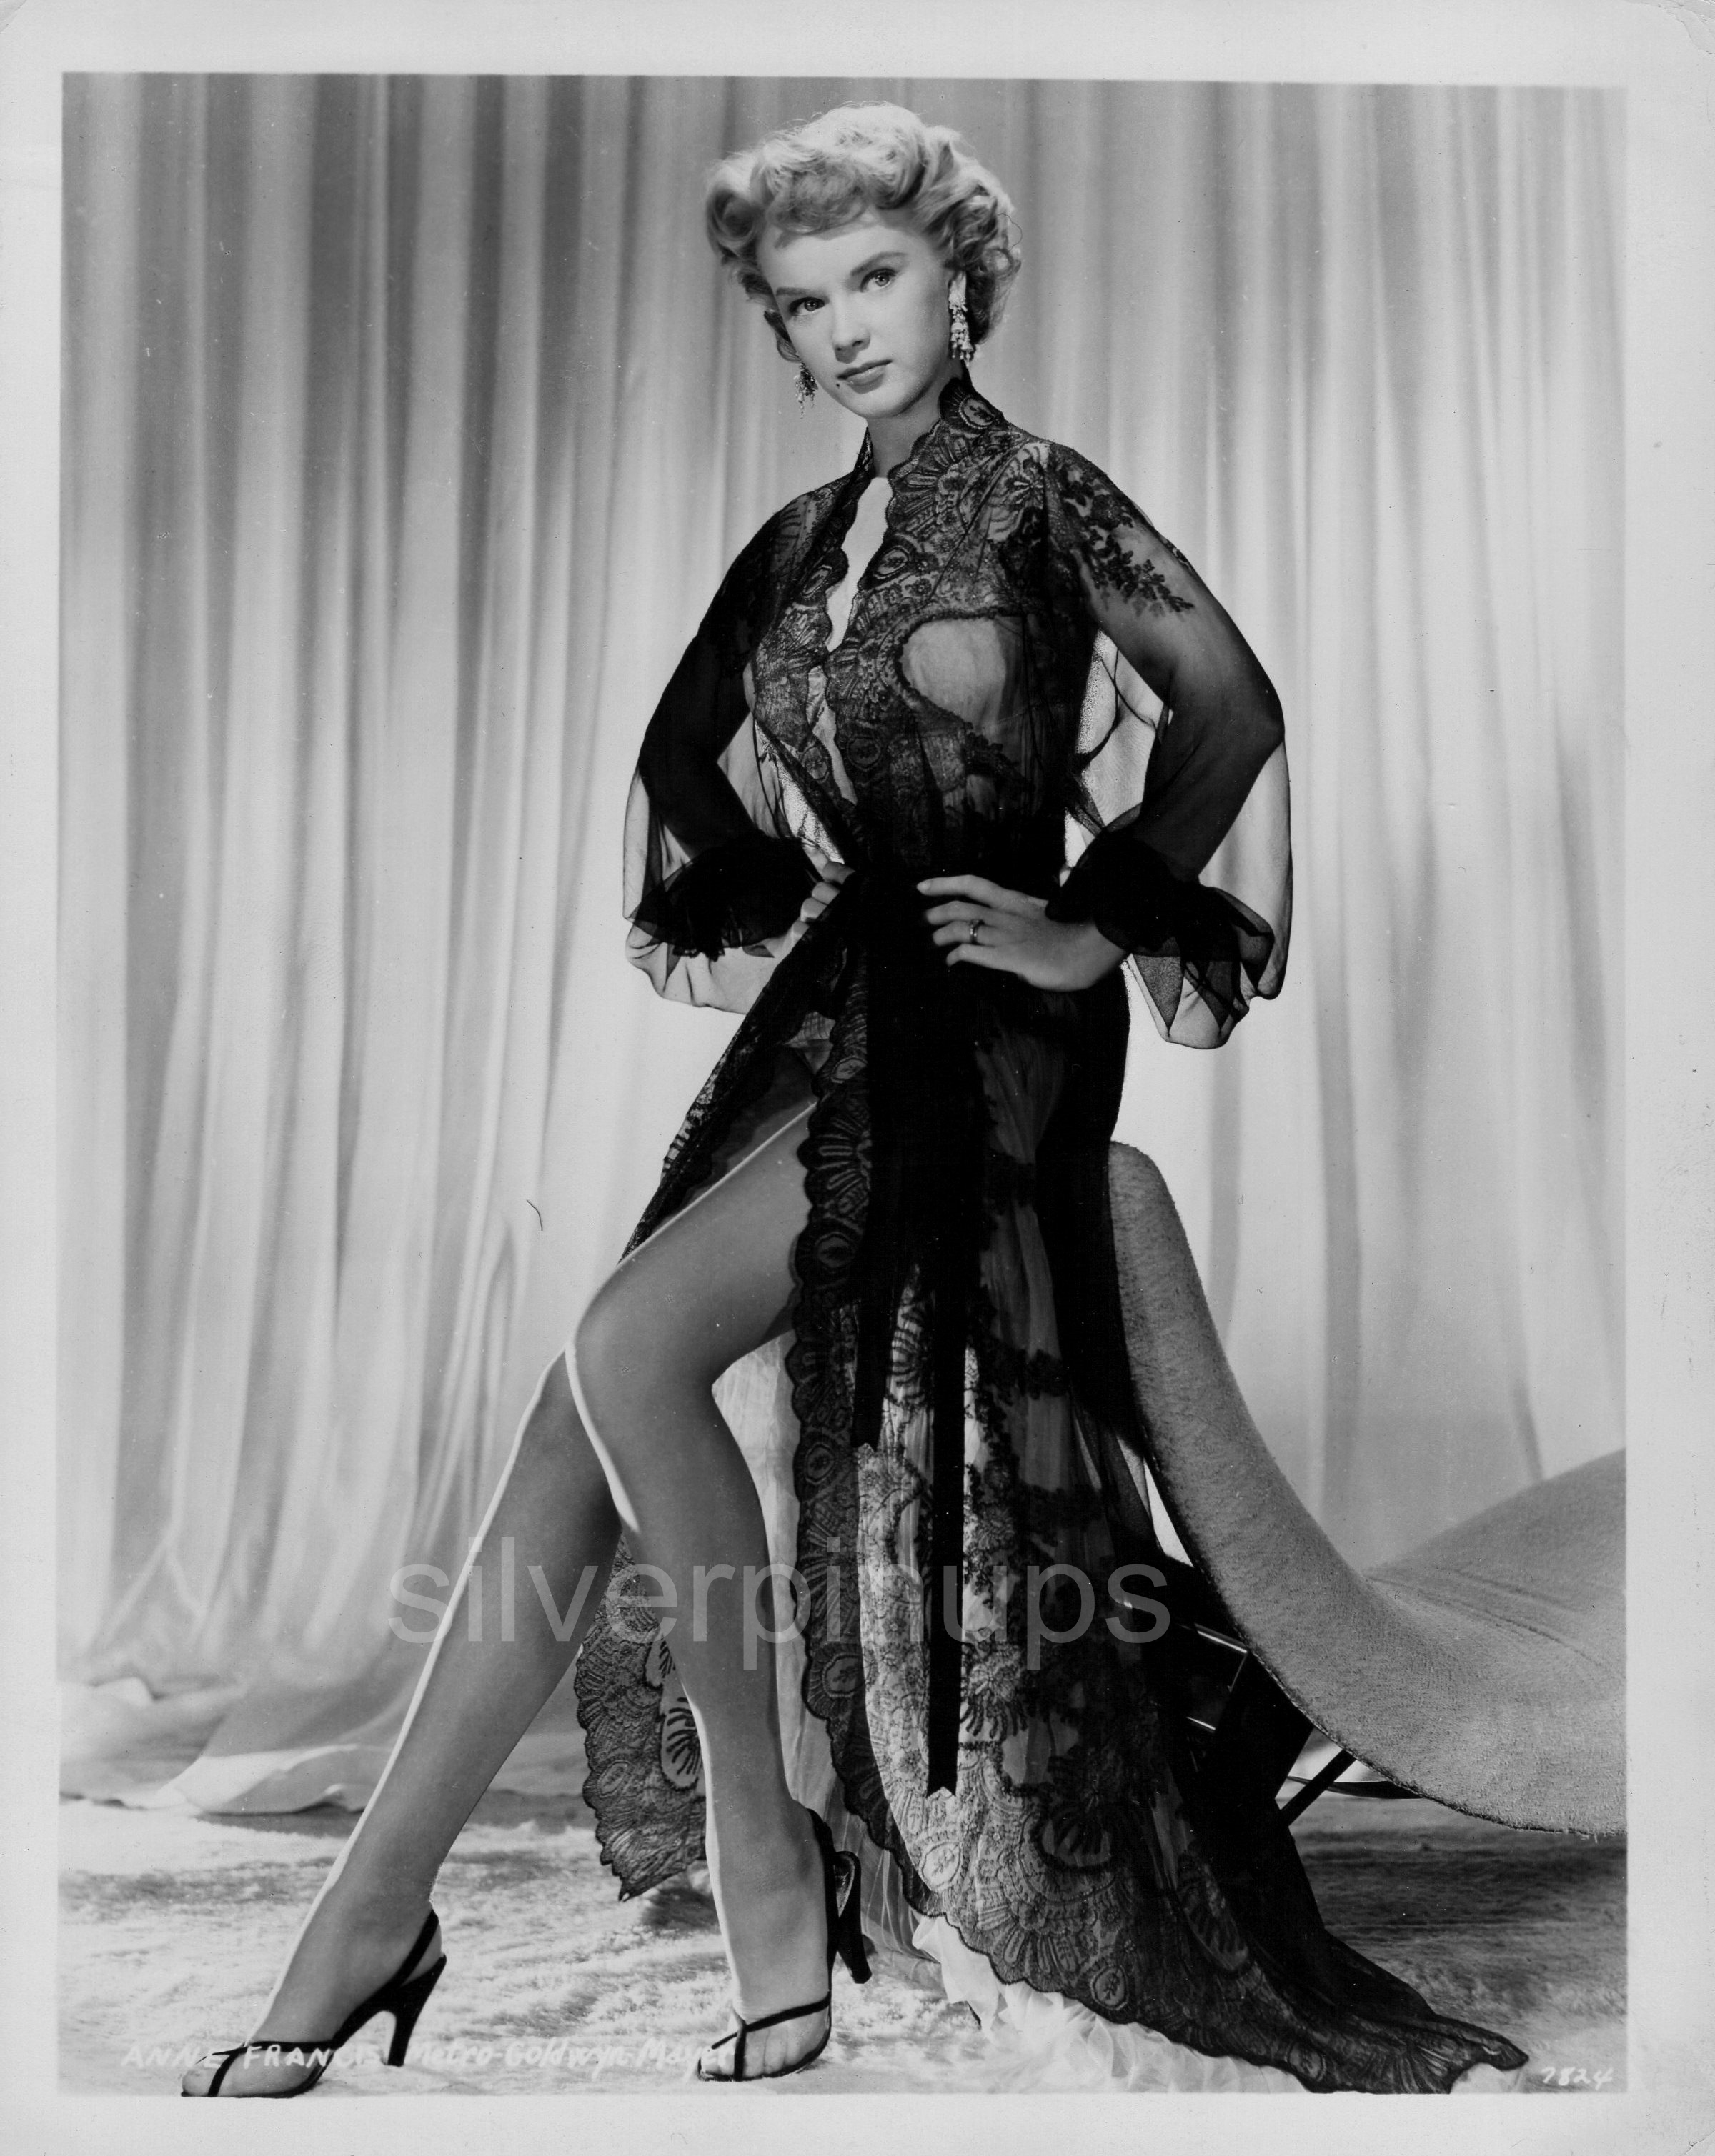 Orig 1950s Anne Francis Modeling In A Negligee Glamour Pin Up Portrait Leg Art Silverpinups 